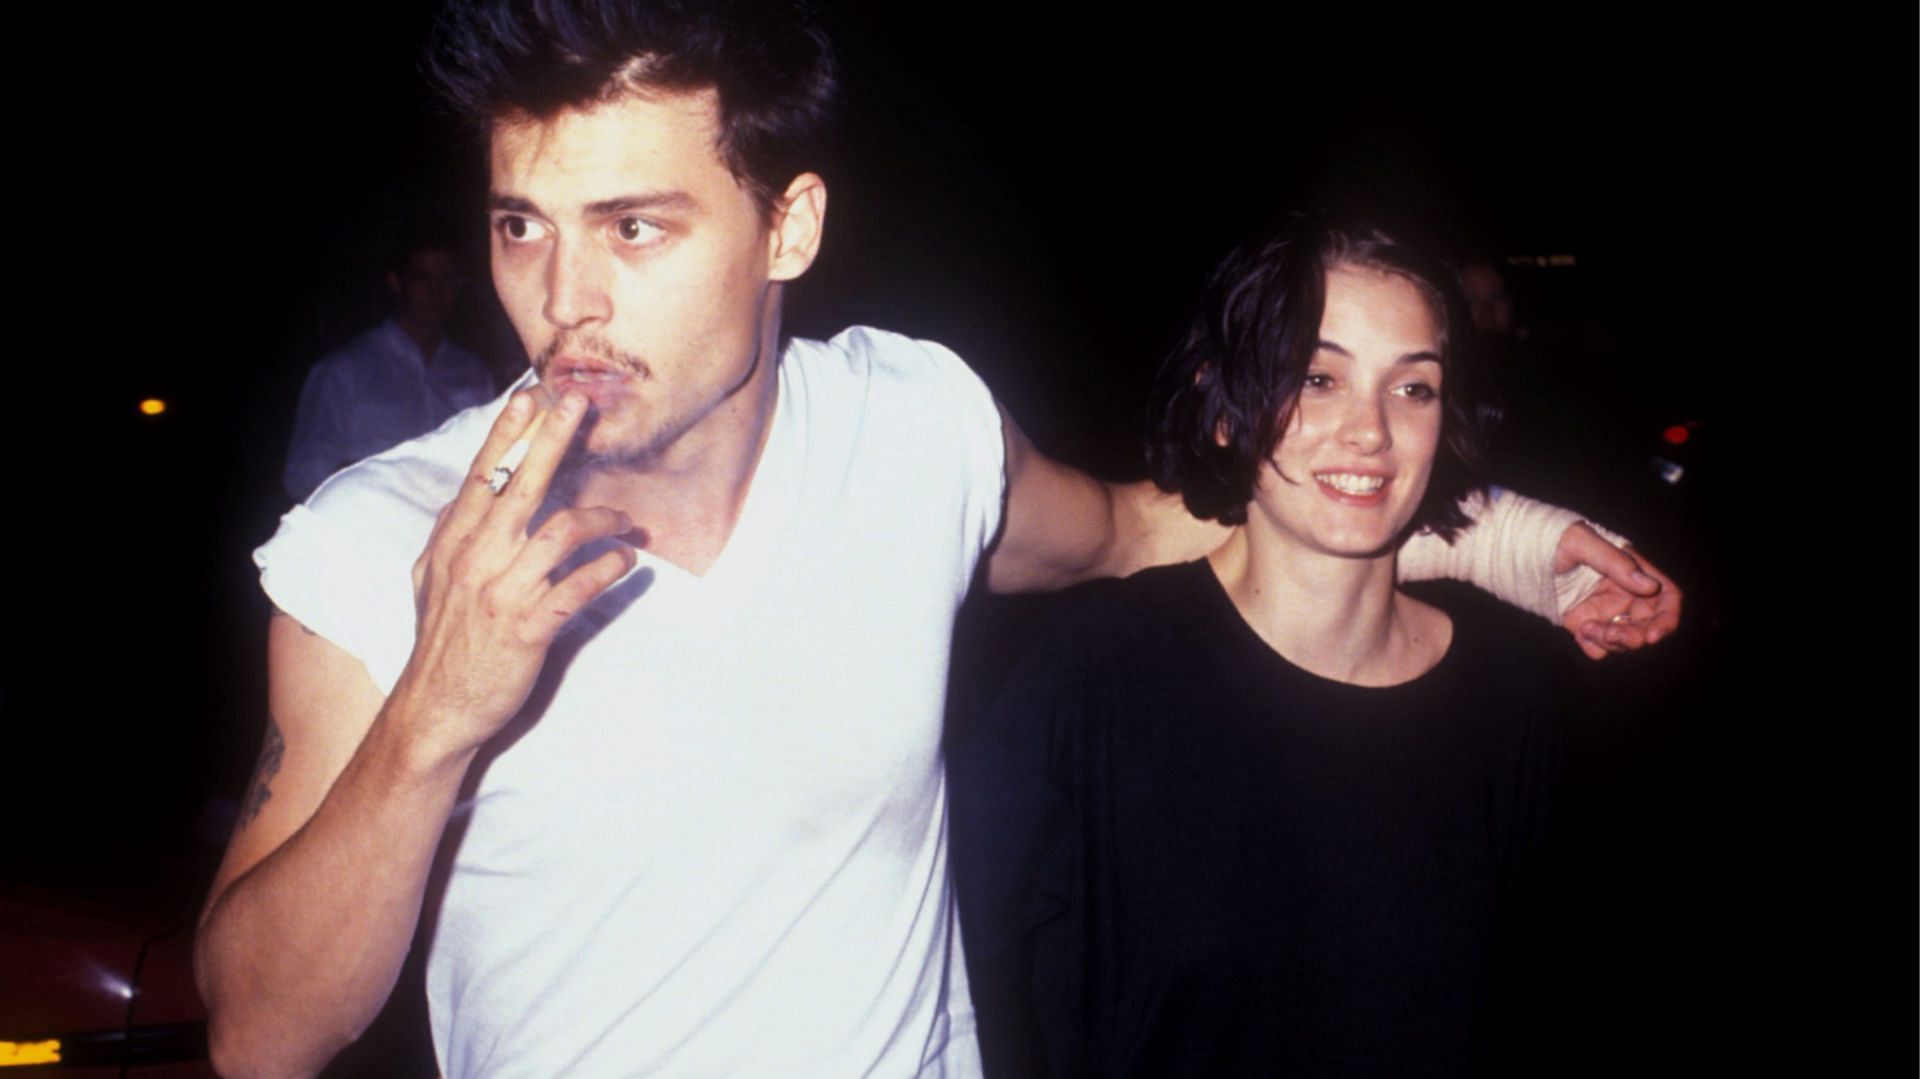 Johnny Depp and Winona Ryder dated for four years before breaking up. (Image via Getty Images/Barry King)